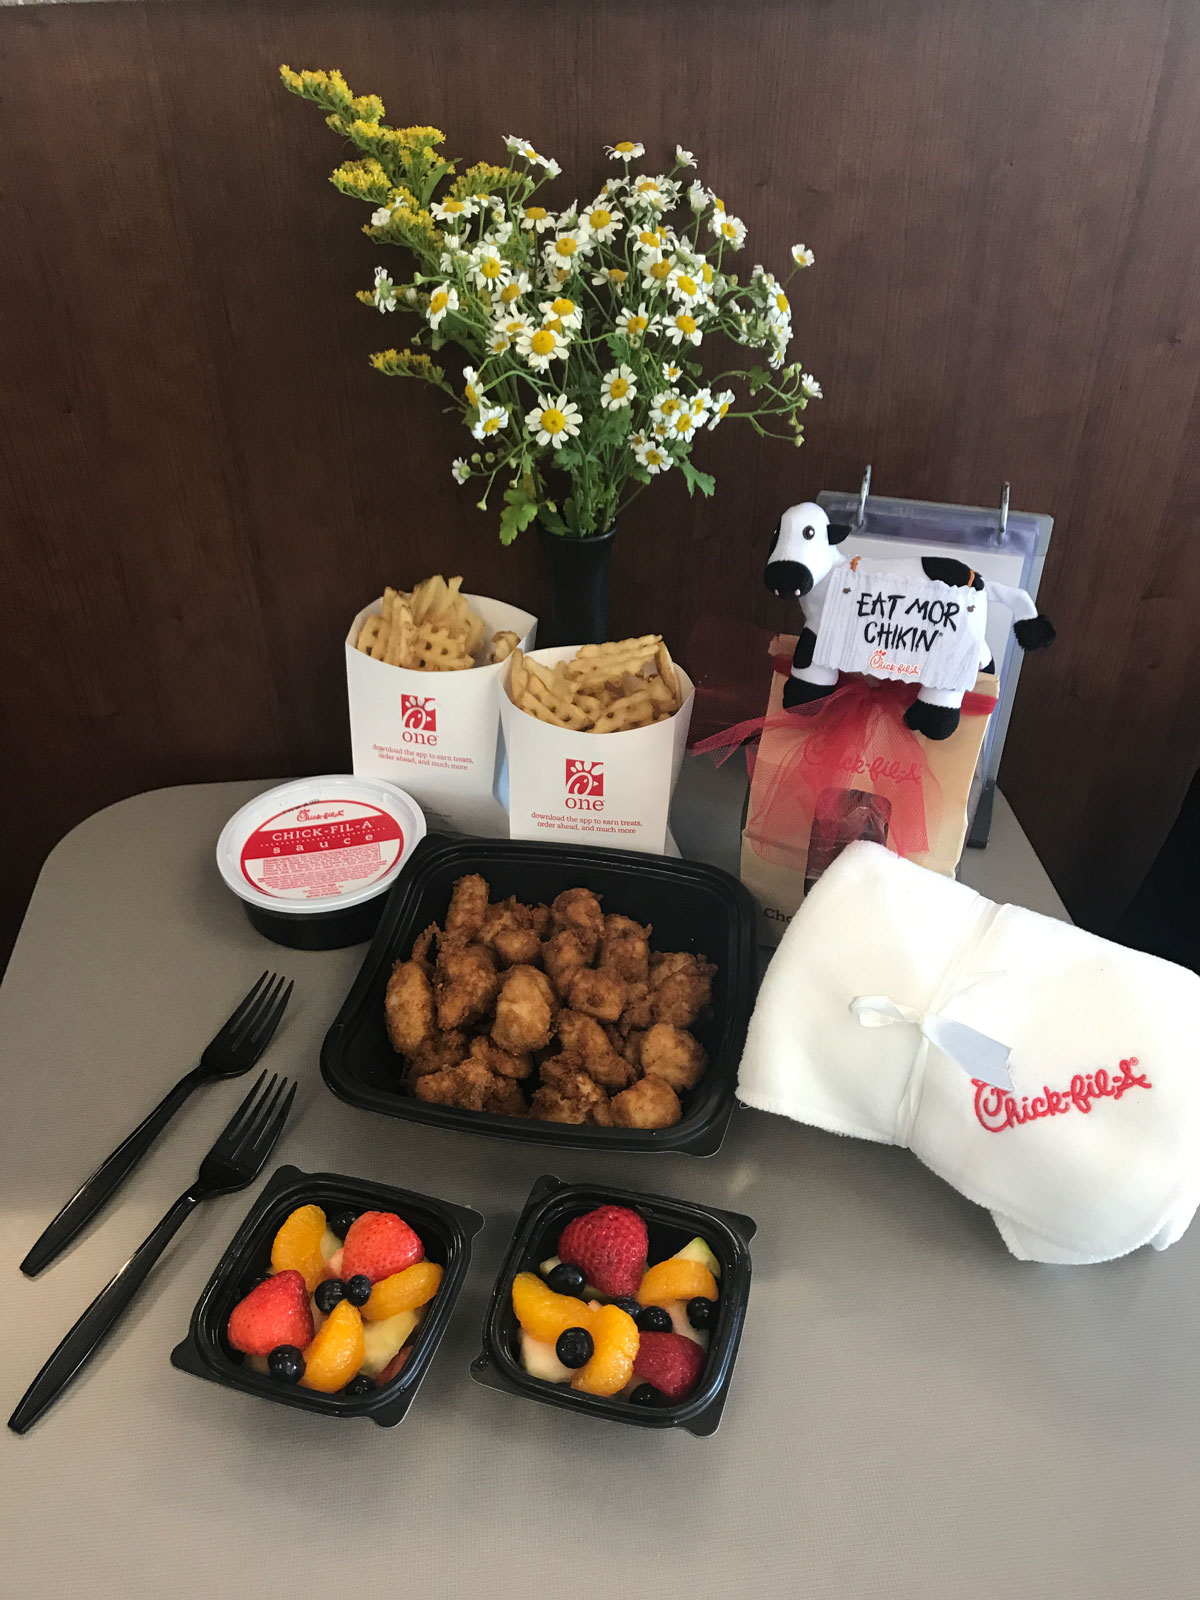 Houston Chick-fil-A is Offering Free Meals to New Parents